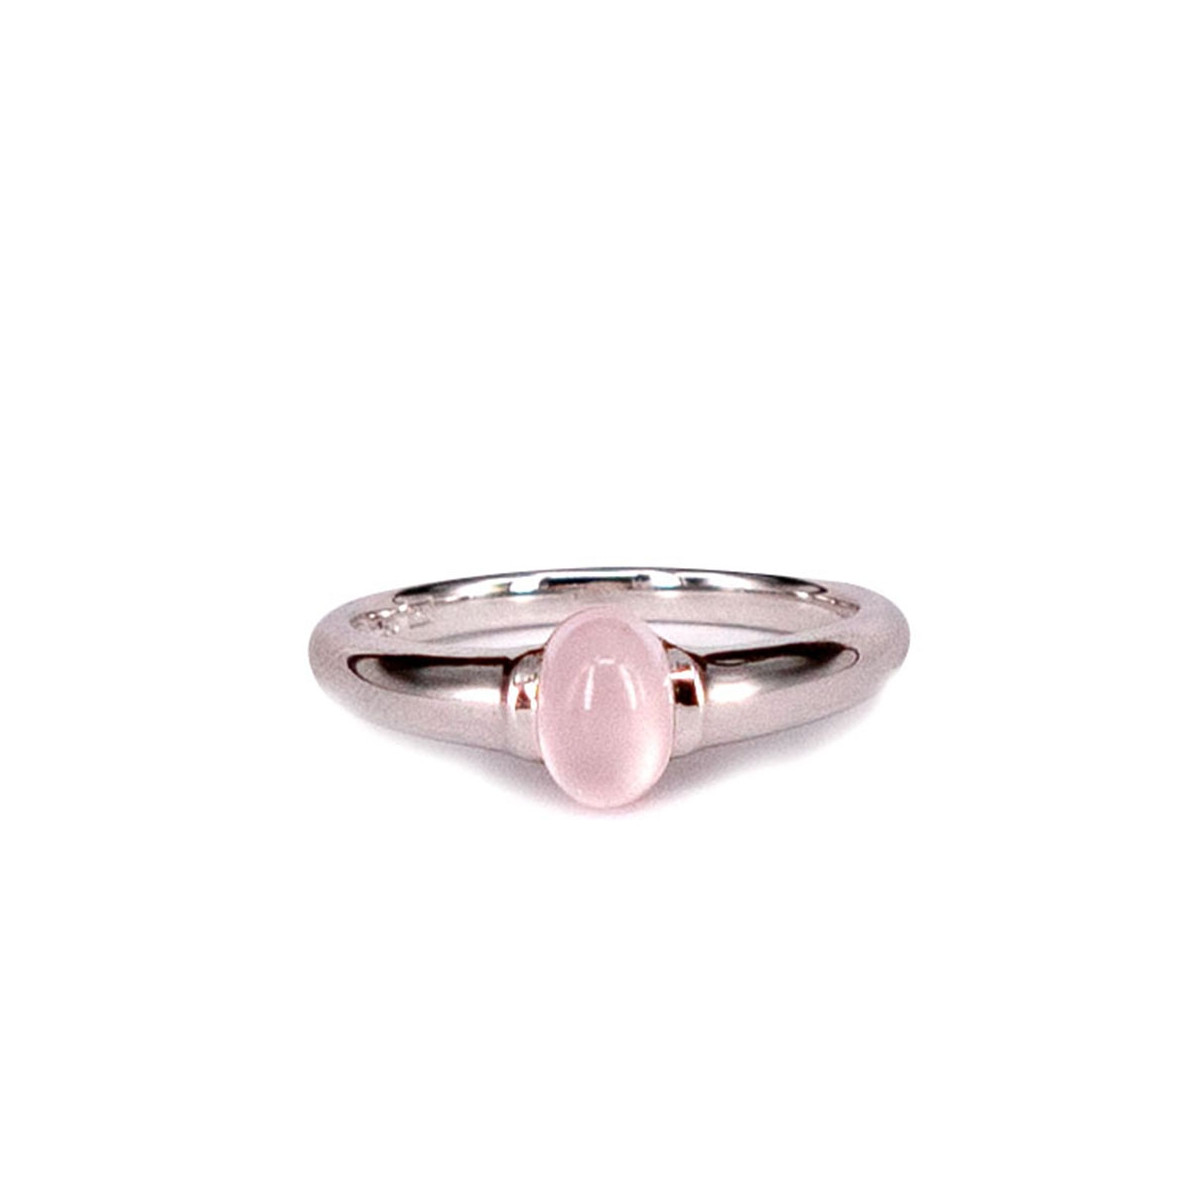 RING IN WHITE GOLD AND ROSE QUARTZ